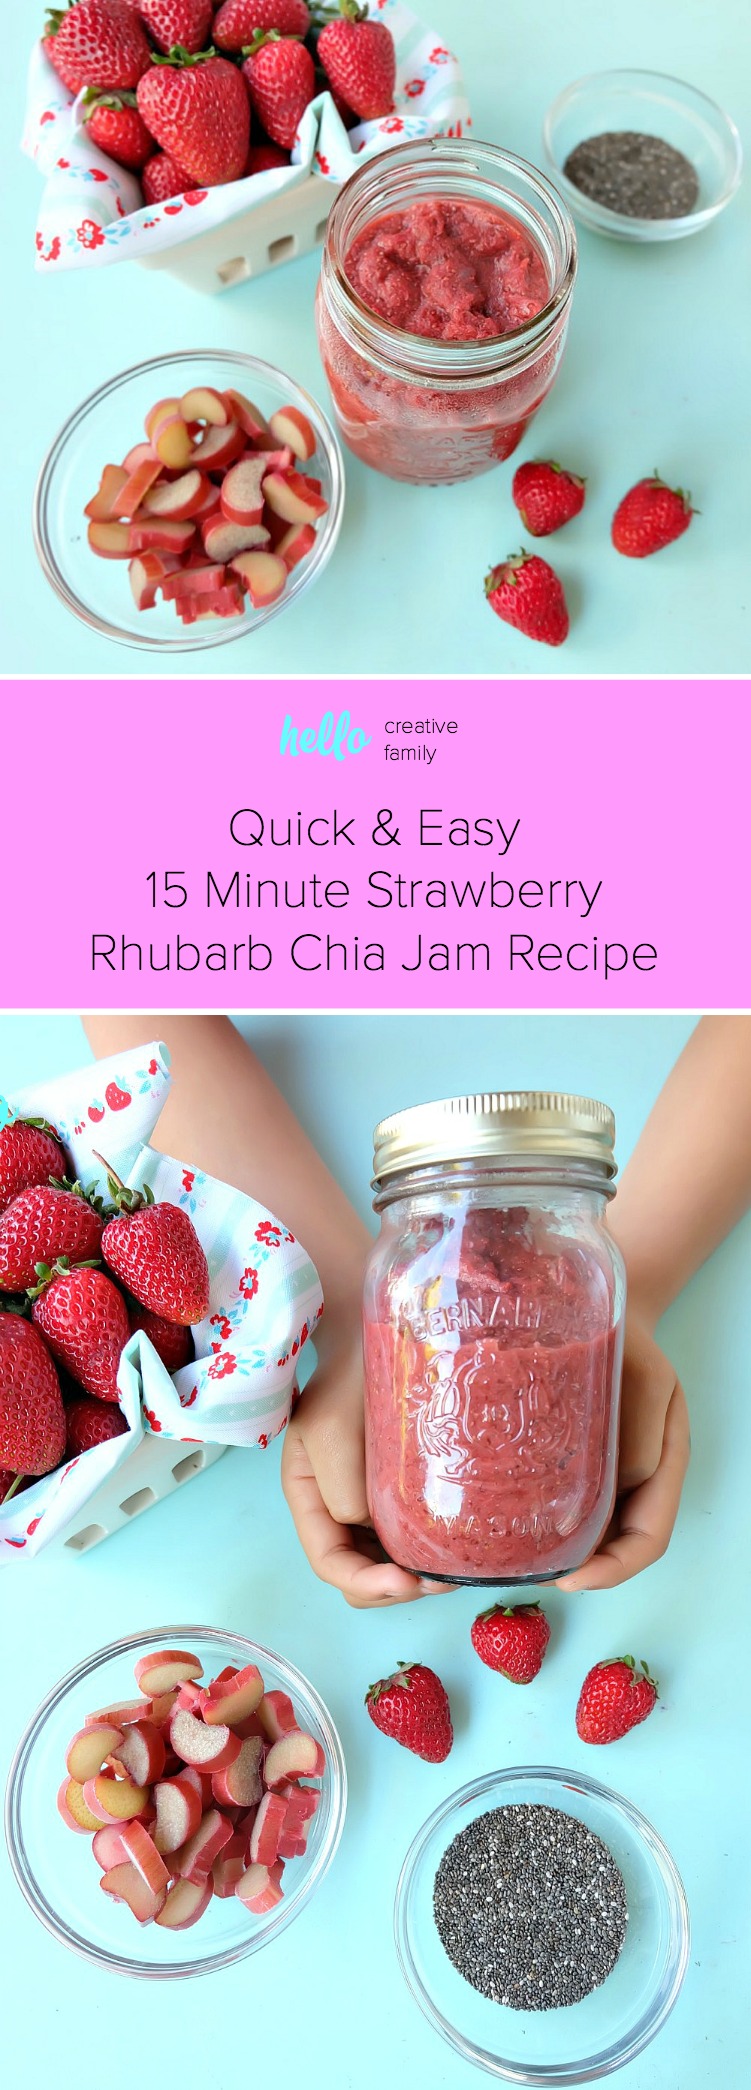 All the flavors of summer in one easy jam! This 15 minute strawberry rhubarb chia jam recipe takes two of my favorite flavors of summer and turns it into one healthy recipe! If you have never made jam before this is the recipe to start with. It uses chia seeds to thicken the jam instead of pectin. Family friendly, get the kids involved in the kitchen helping to make this delicious treat. Perfect for on bread, mixed with greek yogurt or as an ice cream topper! #Jam #chia #strawberry #rhubarb #recipe